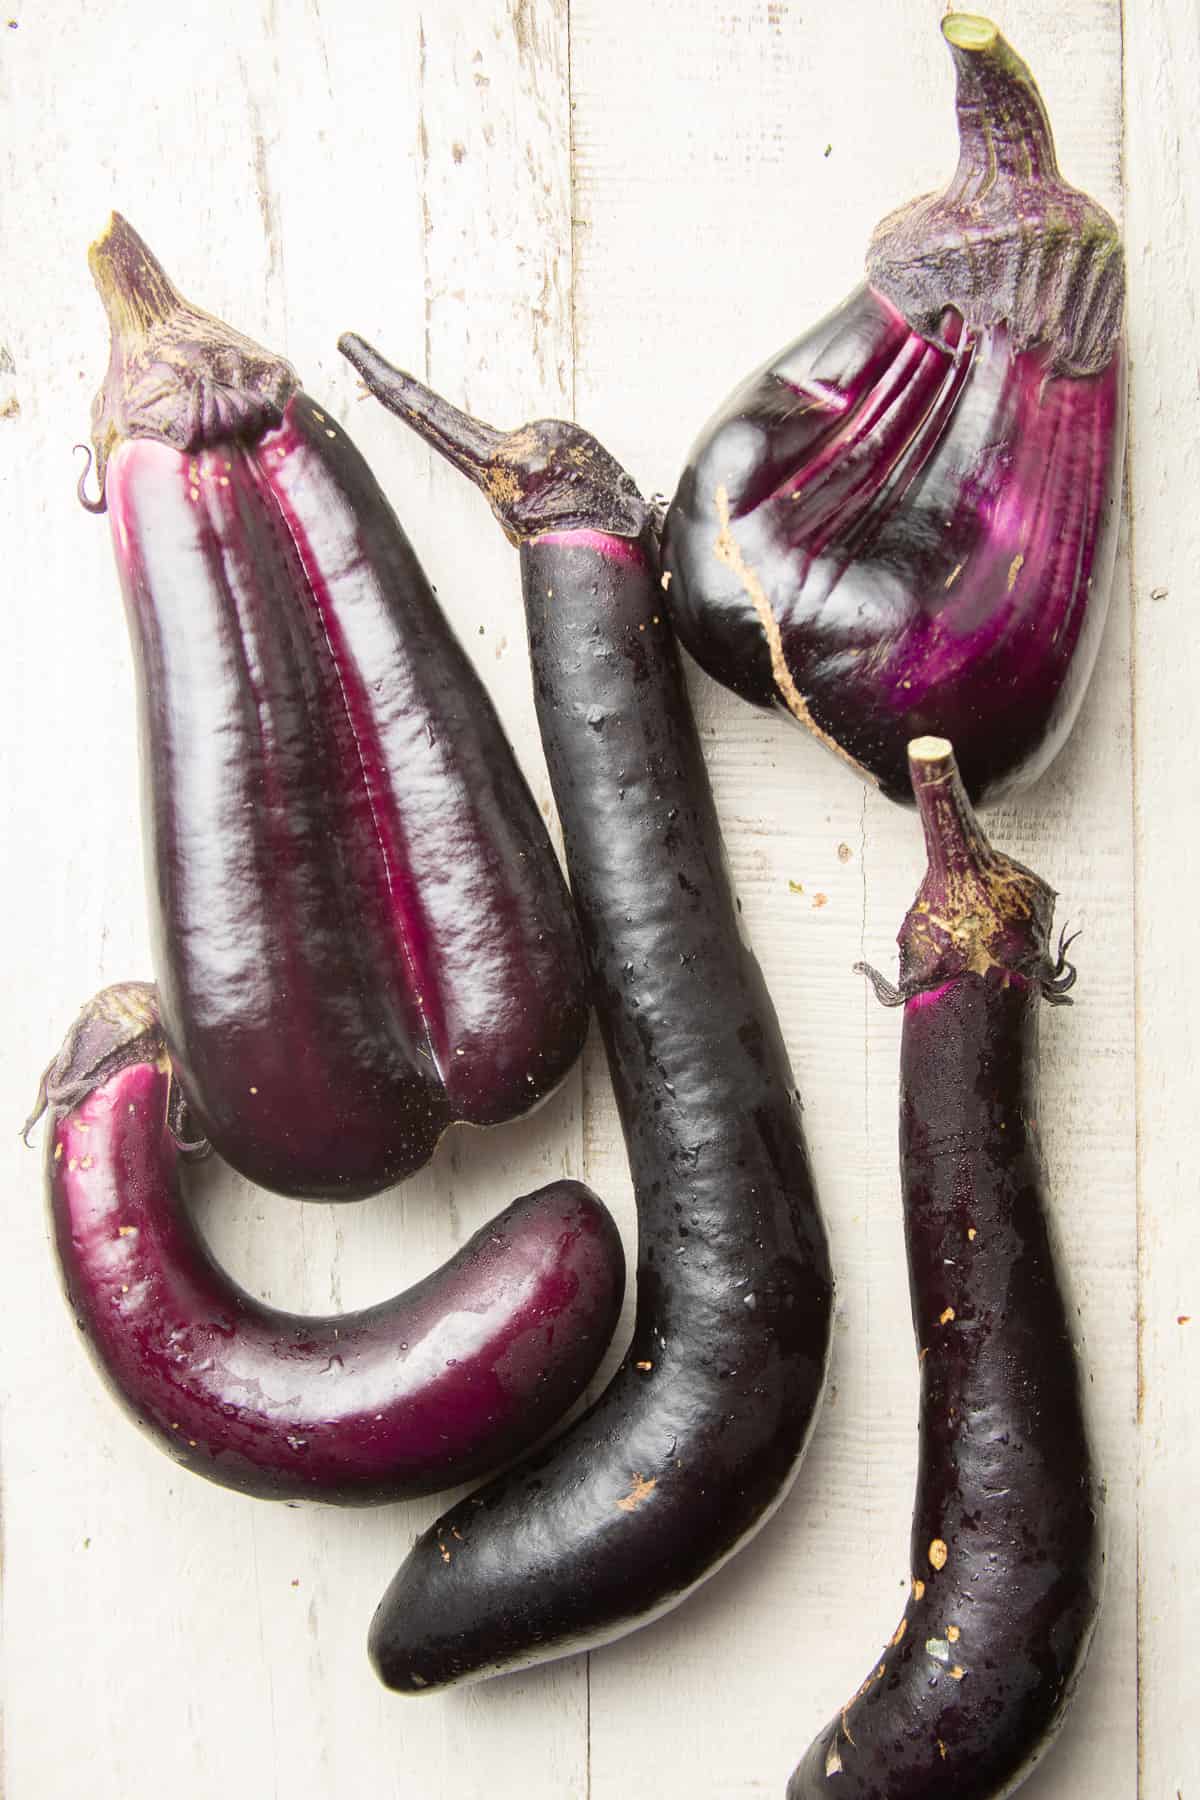 Five Japanese eggplants on a white wooden surface.